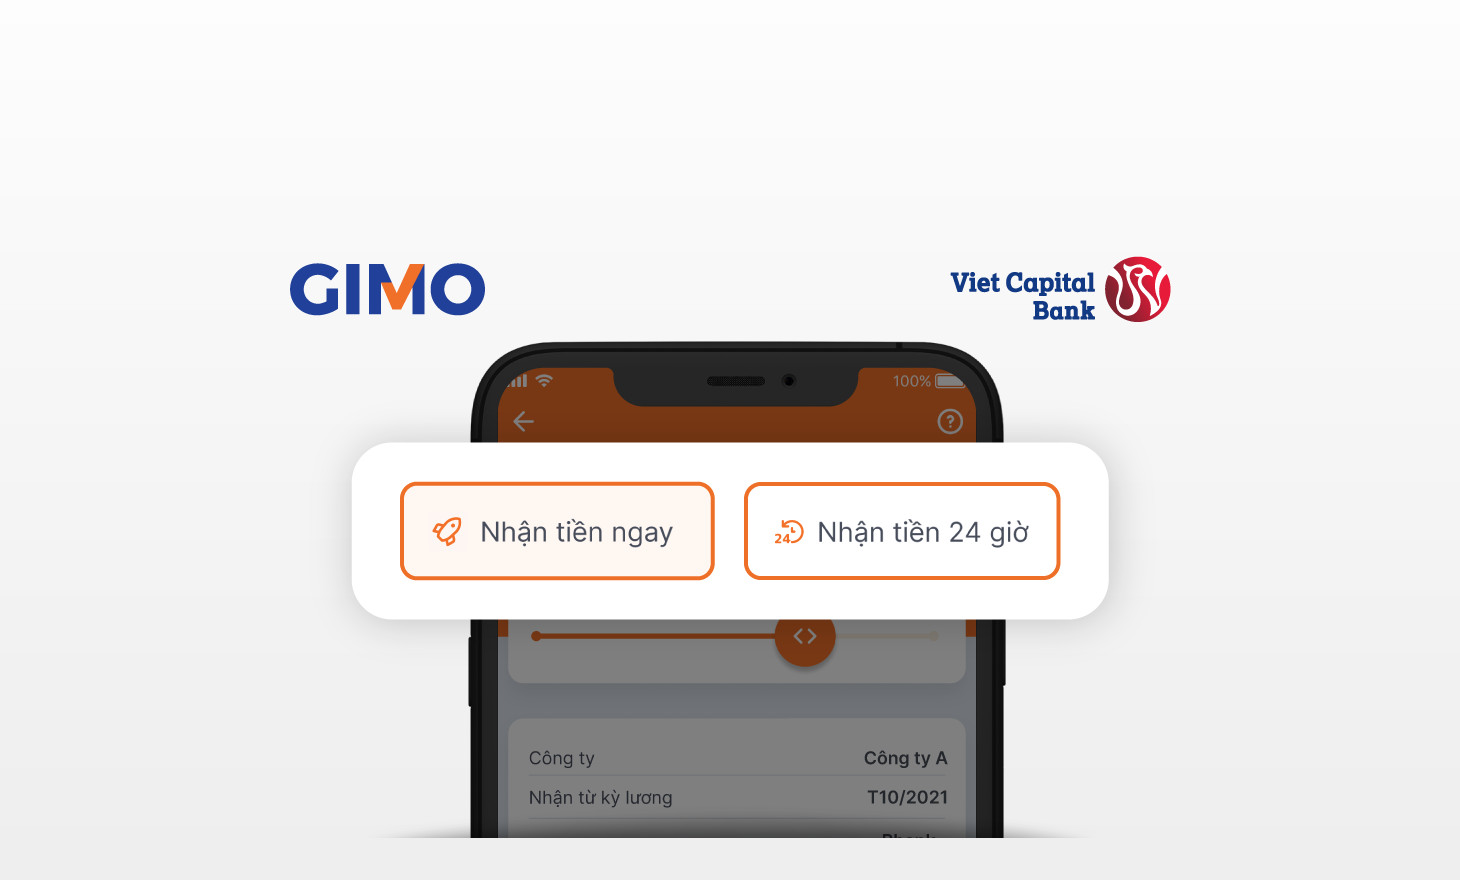 GIMO Partners with Viet Capital Bank to Launch the New Instant Pay Feature